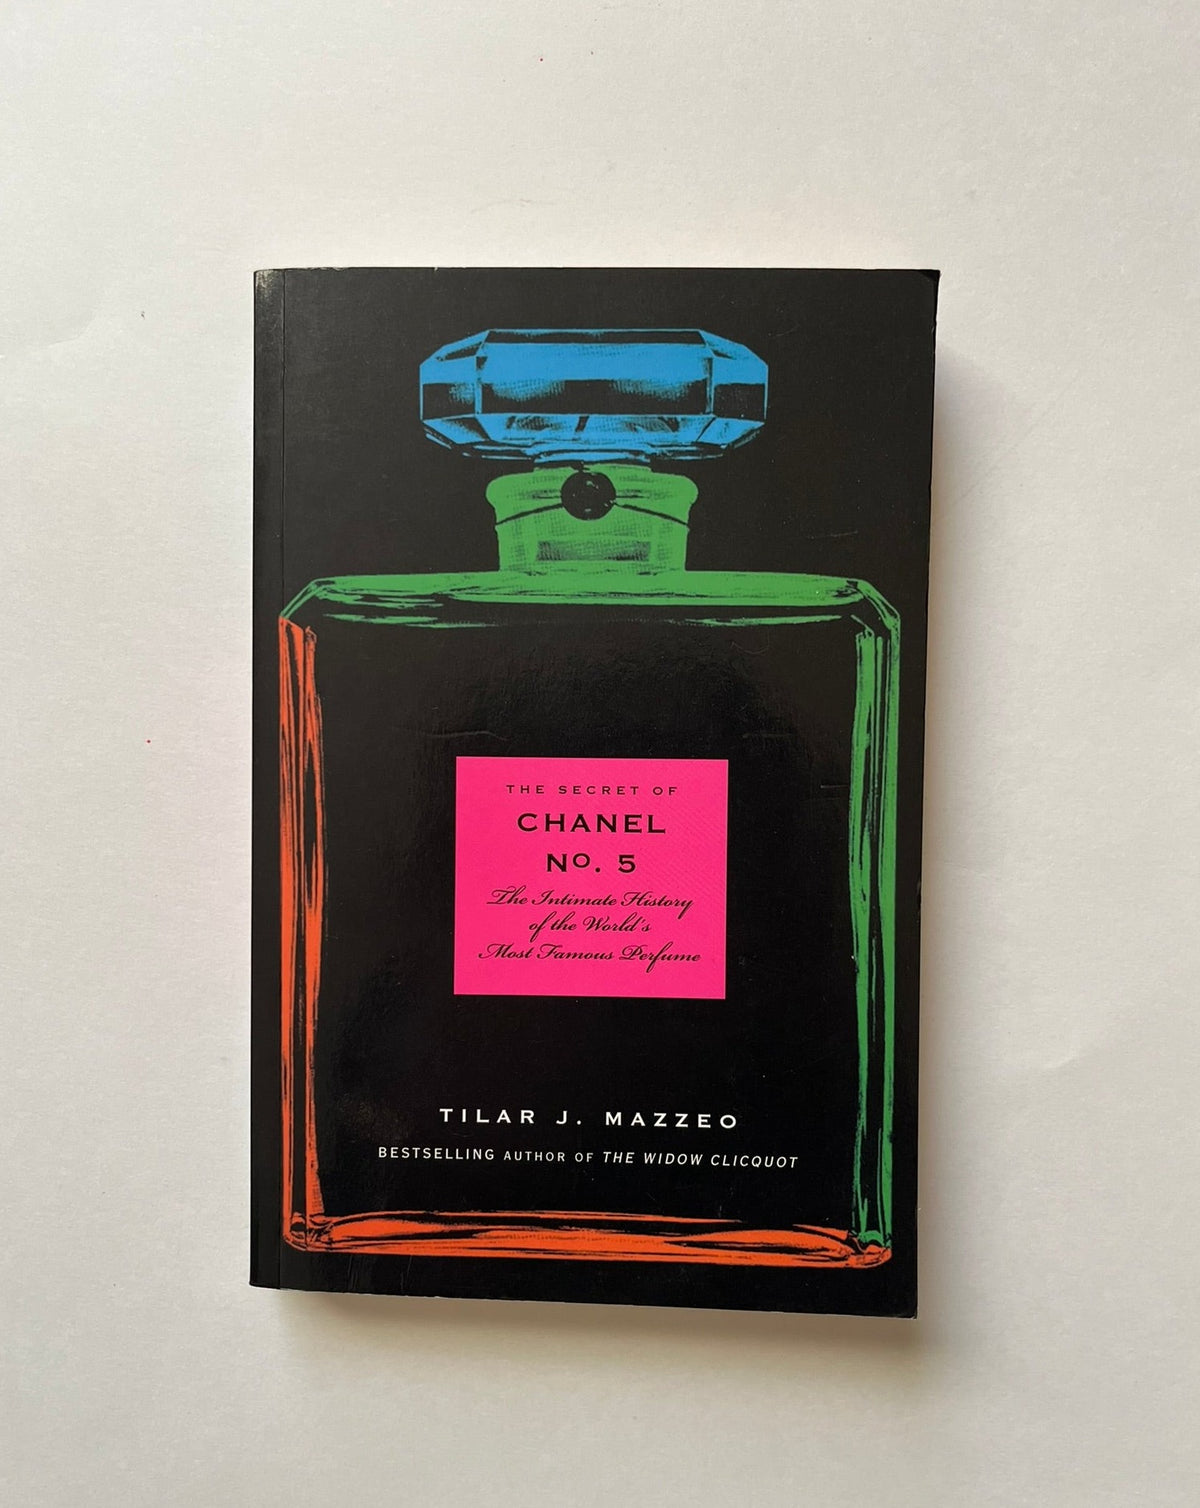 The Secret of Chanel No. 5: The Intimate History of the World&#39;s Most Famous Perfume by Tilar J. Mazzeo